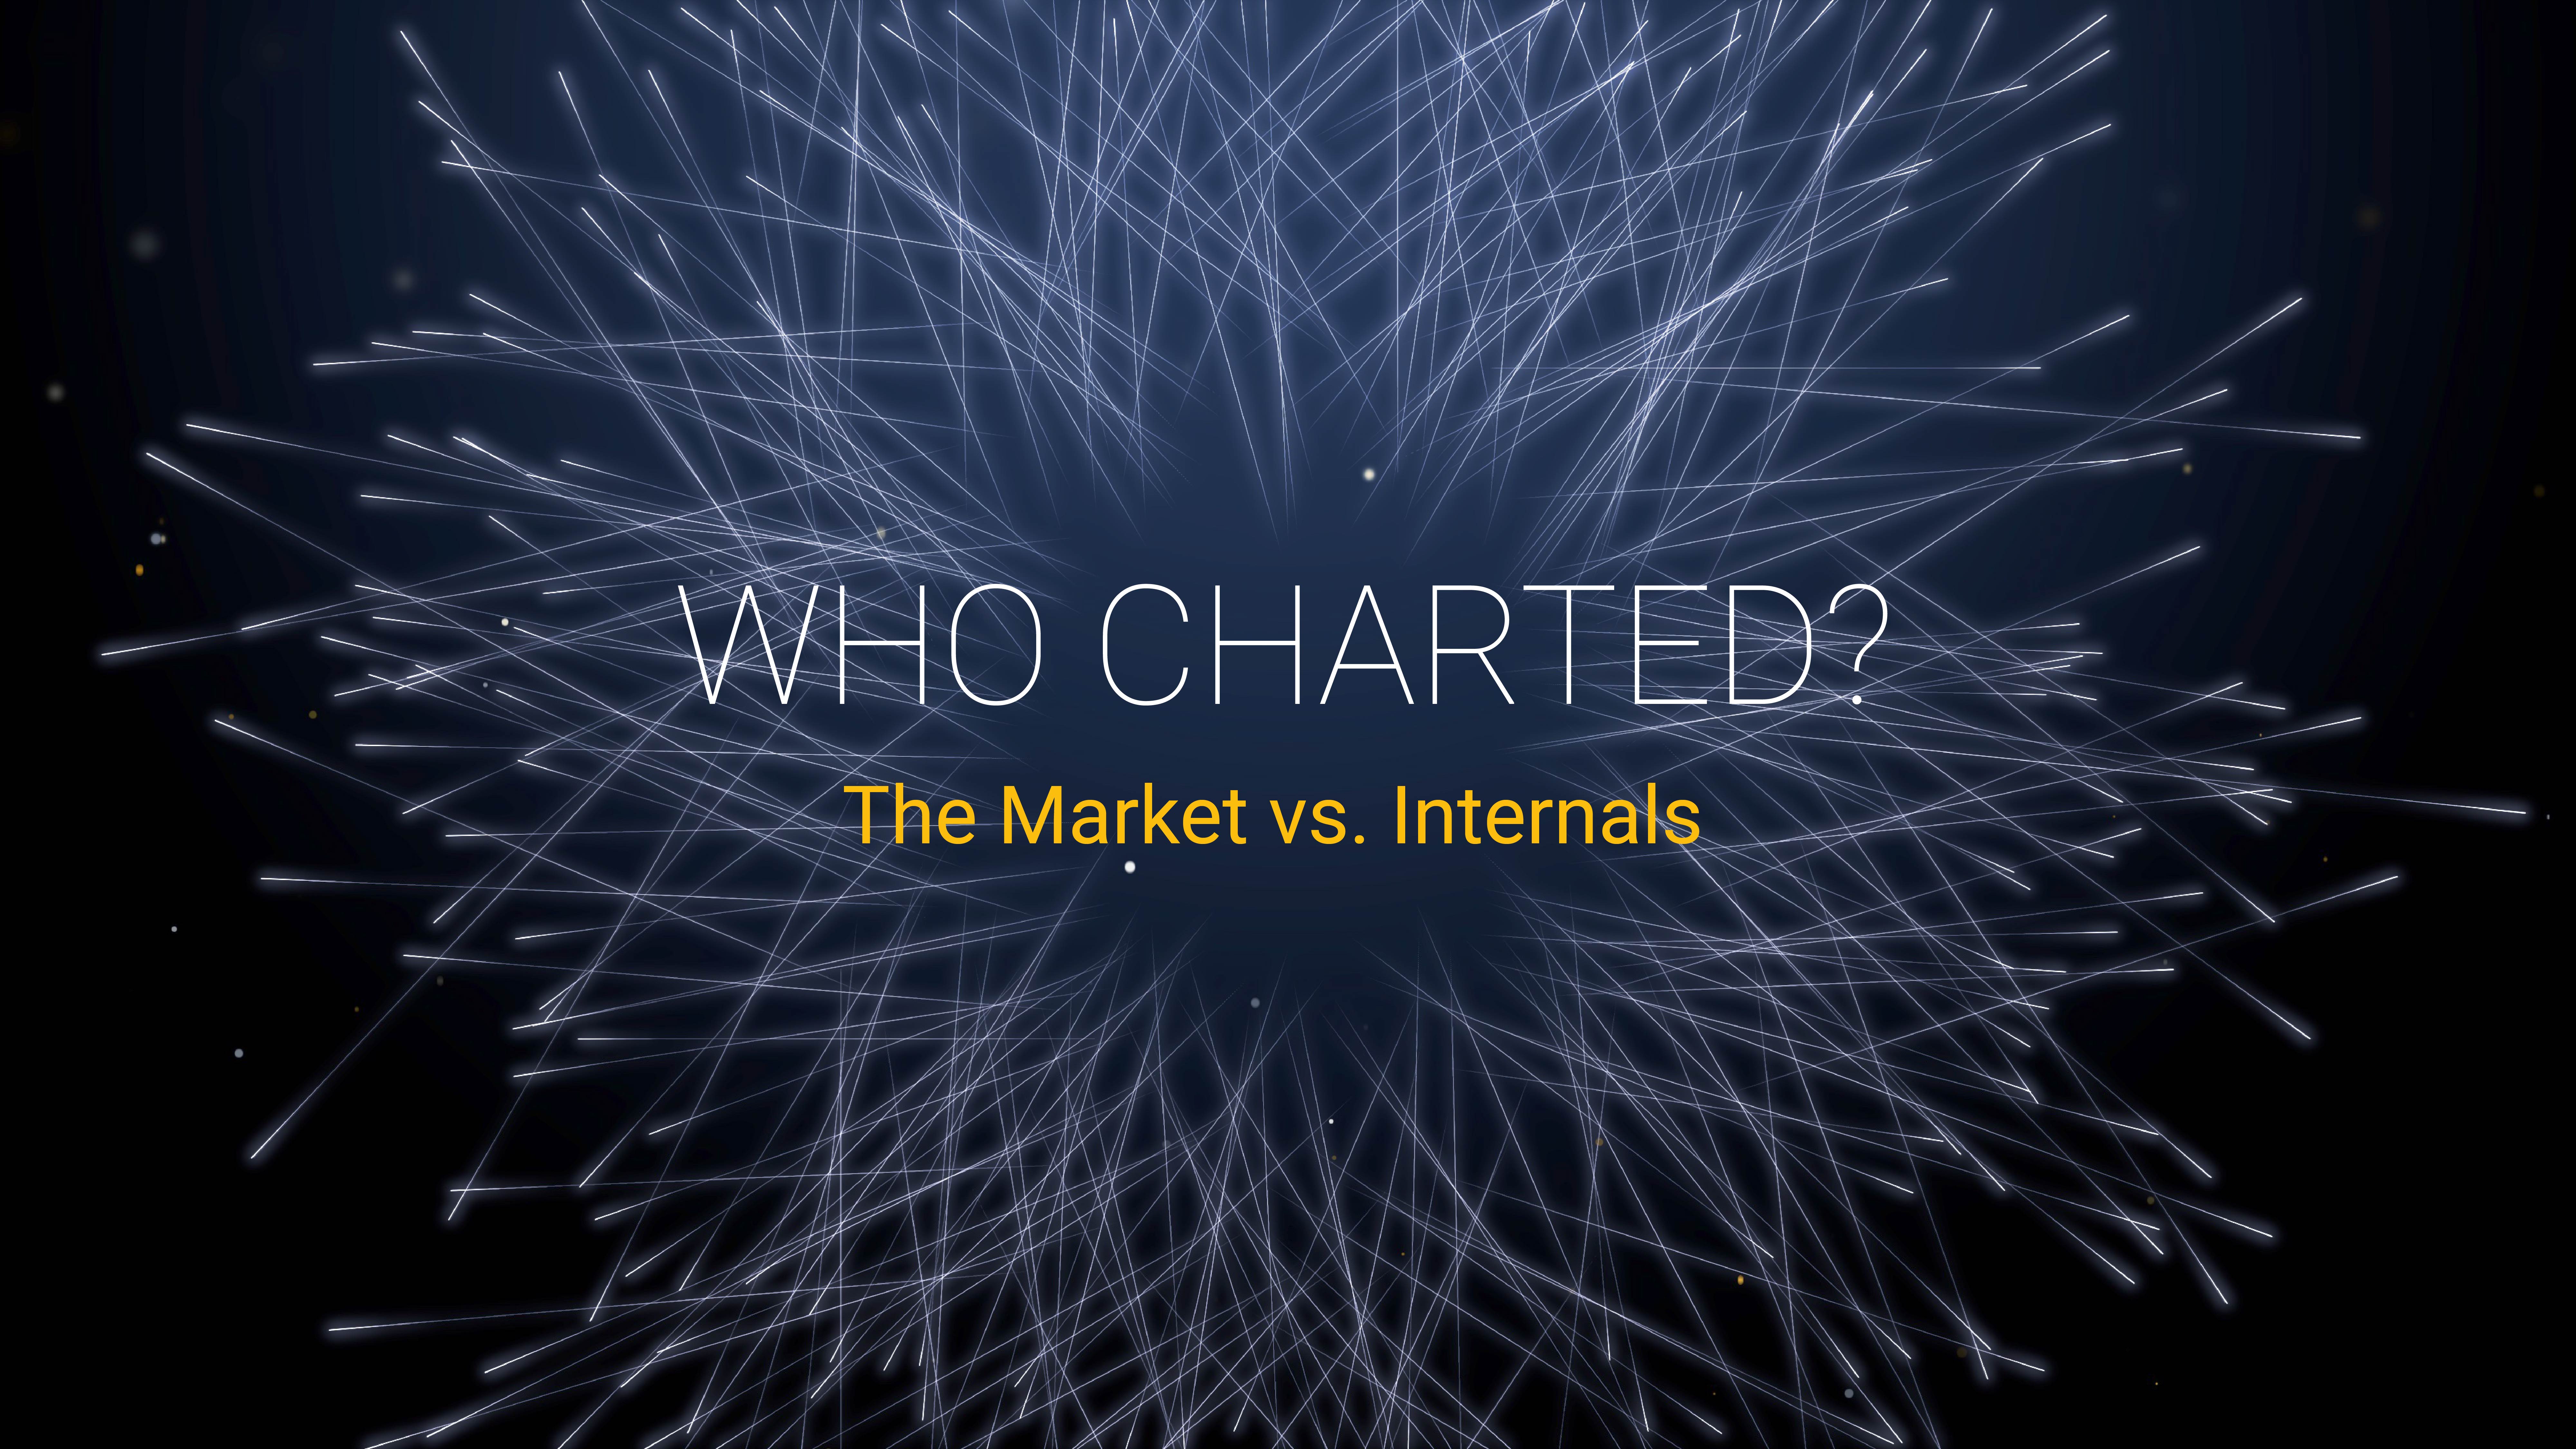 Who Charted? (E5) The Market vs. Internals